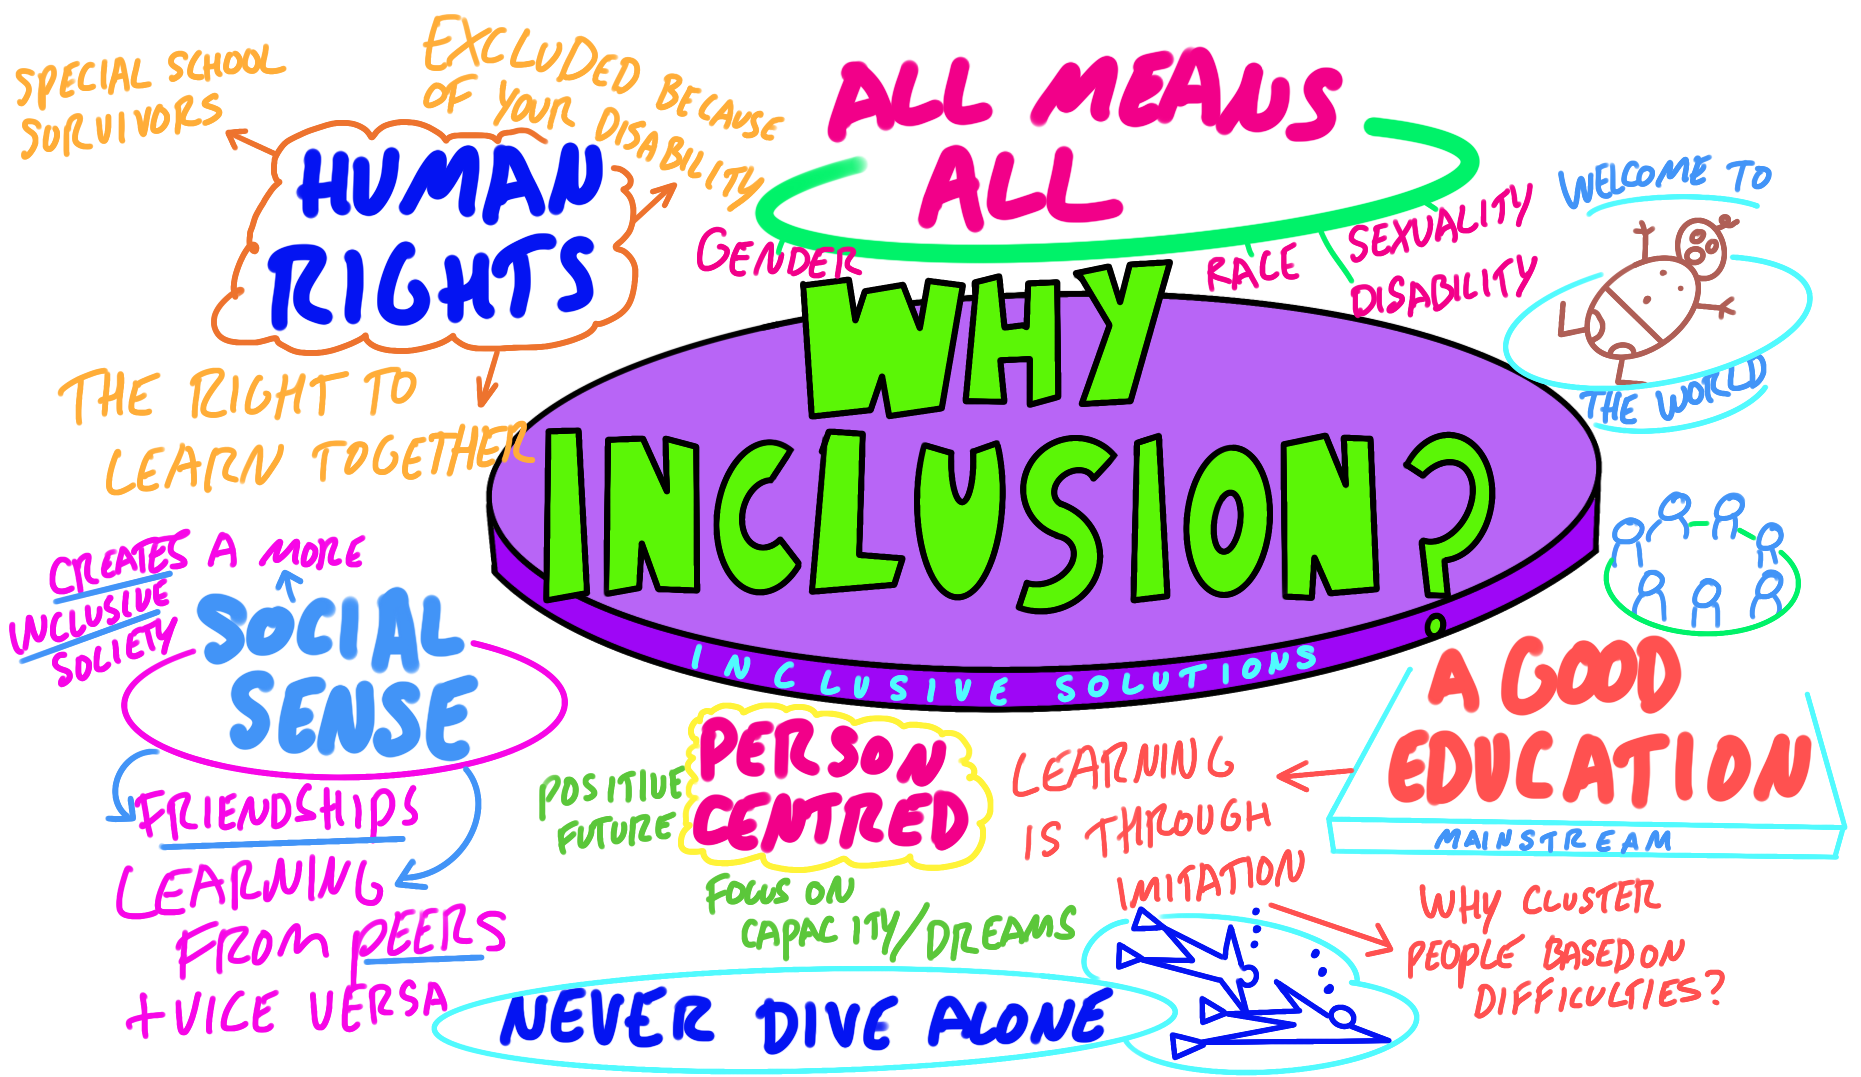 Why inclusion?